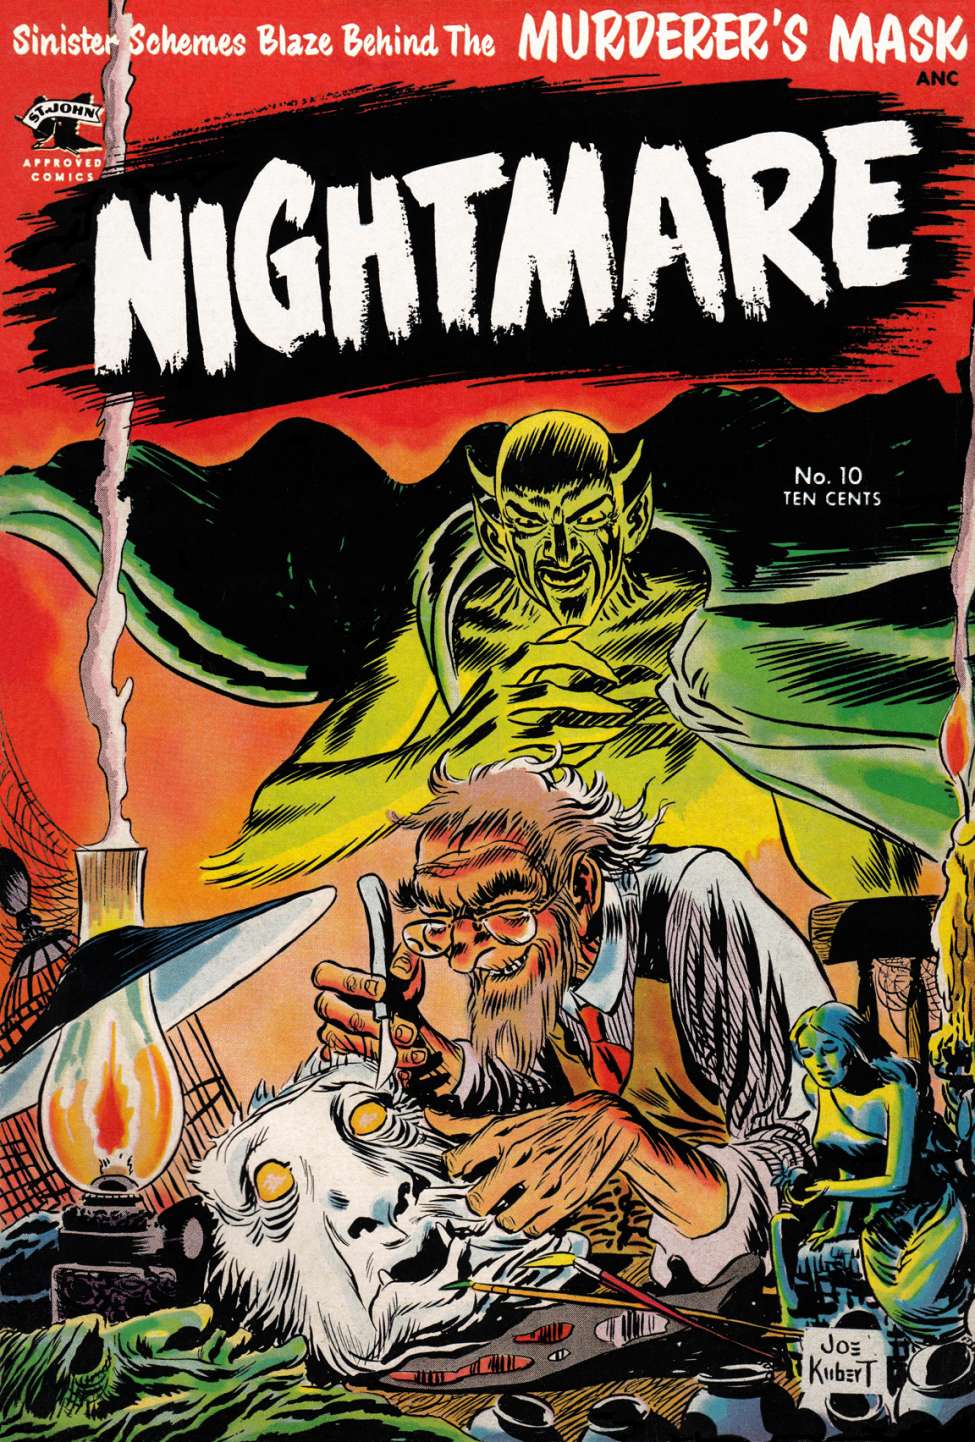 Book Cover For Nightmare 10